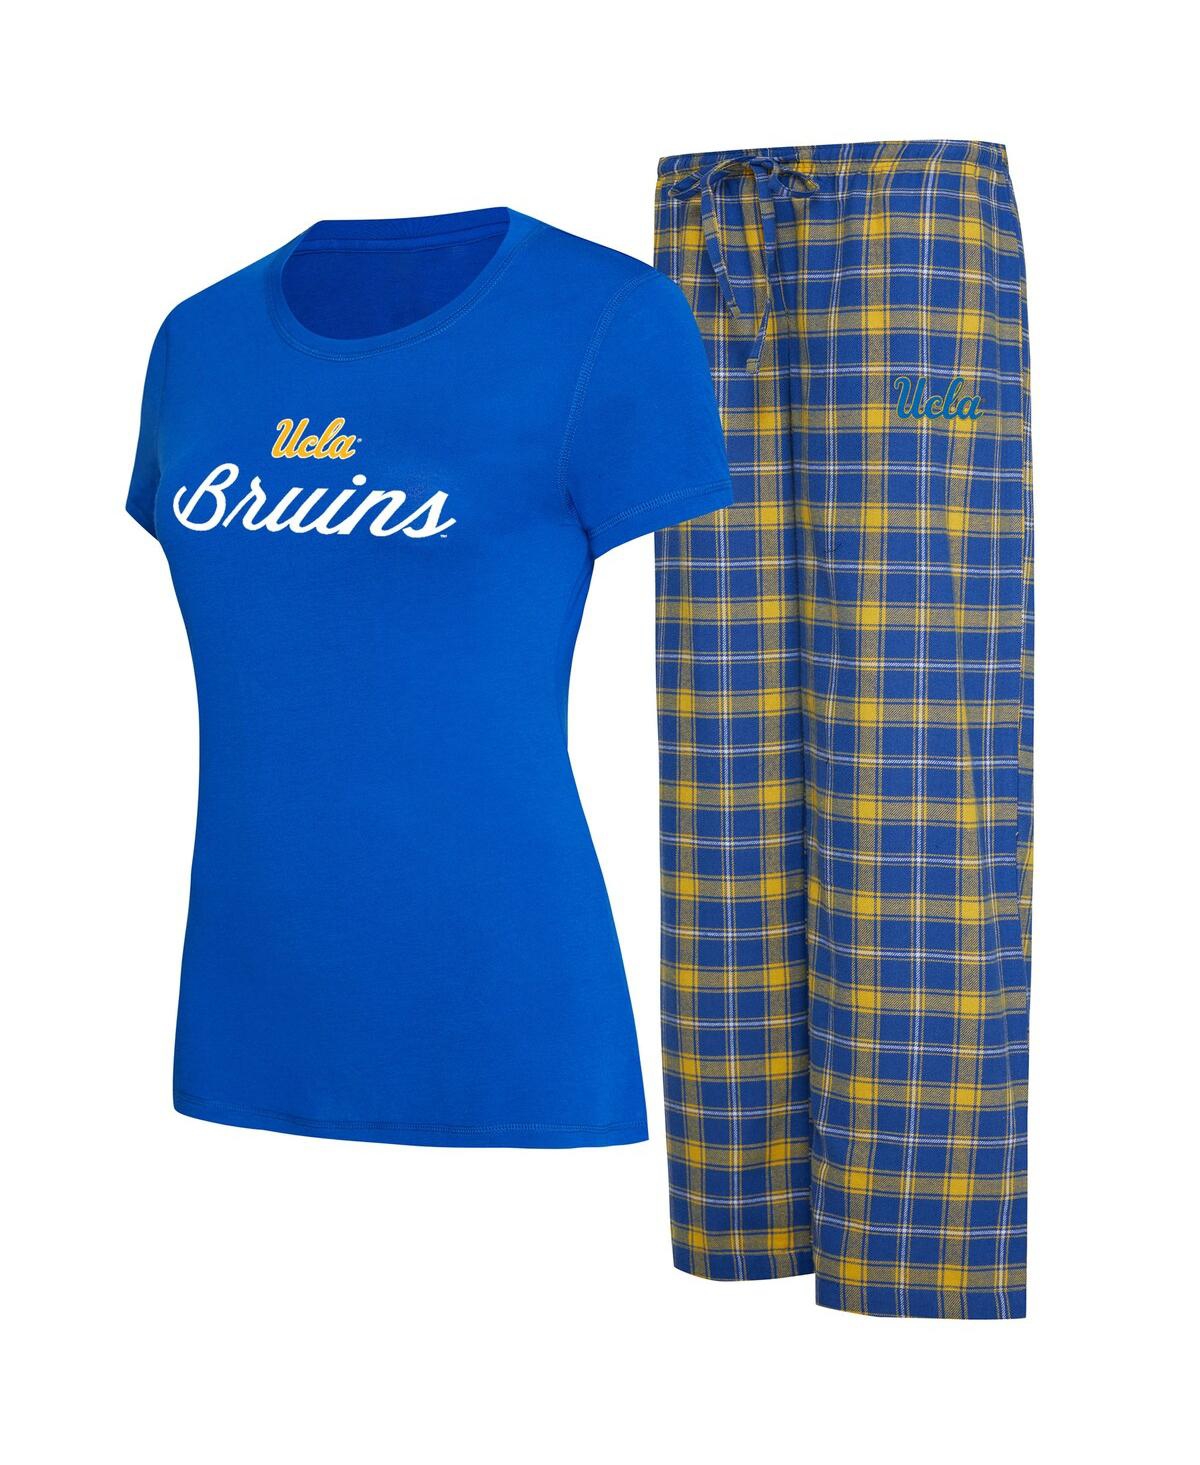 Women's Concepts Sport Royal, Gold Ucla Bruins Arctic T-shirt and Flannel Pants Sleep Set - Royal, Gold